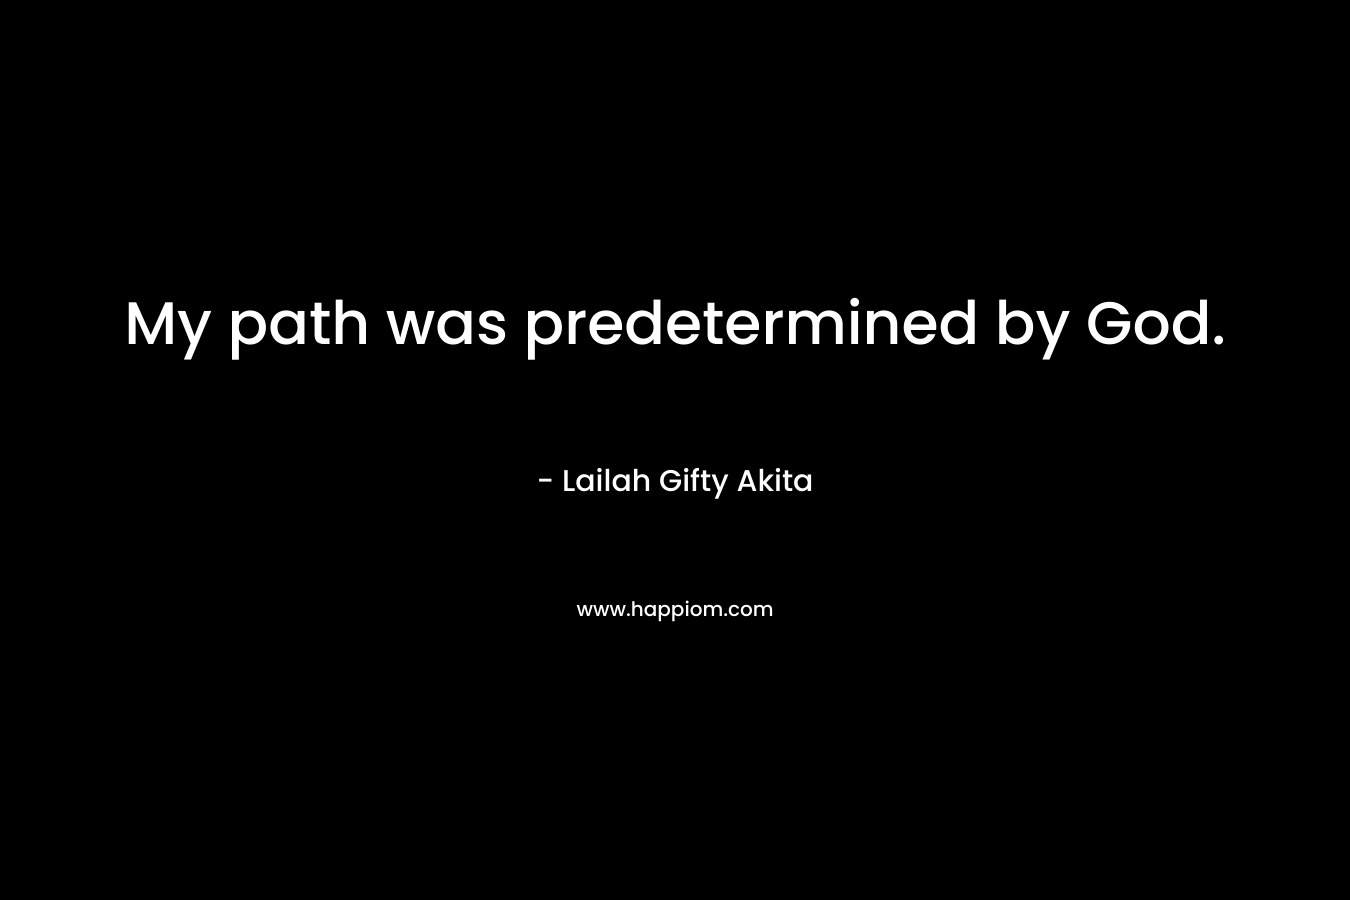 My path was predetermined by God.